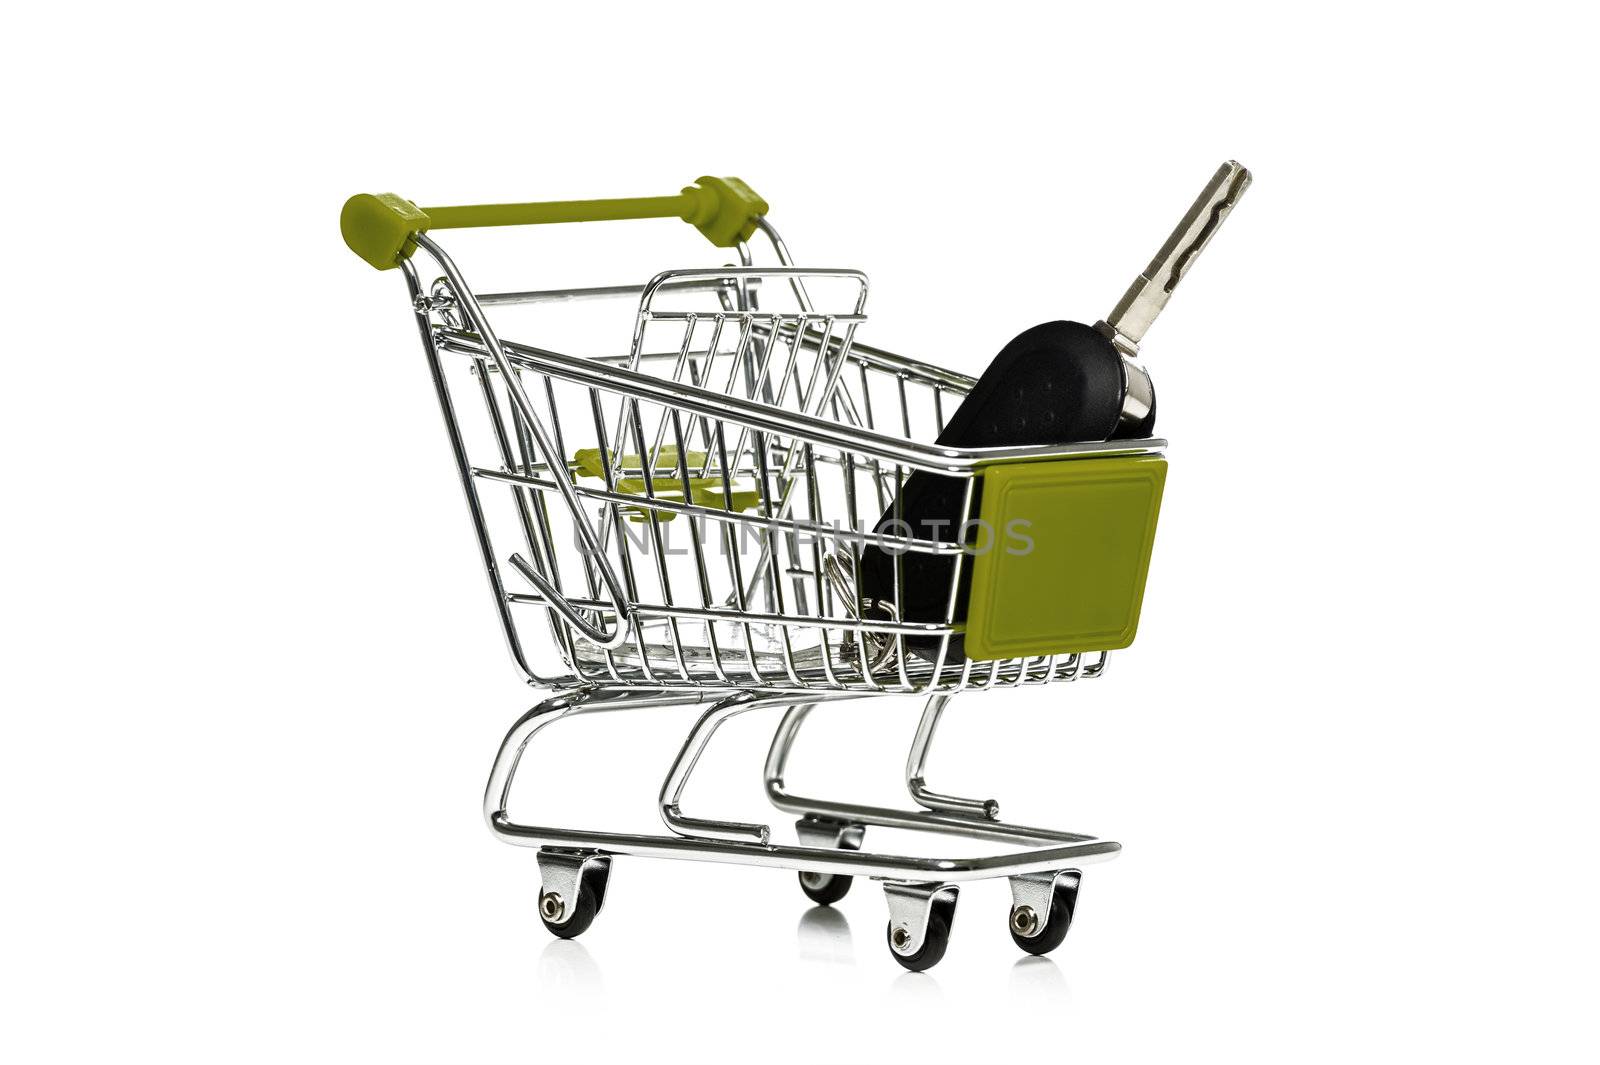 Car key in a metal shopping trolley on a white background conceptual of commerce, retail sales, ownership and an online shopping cart